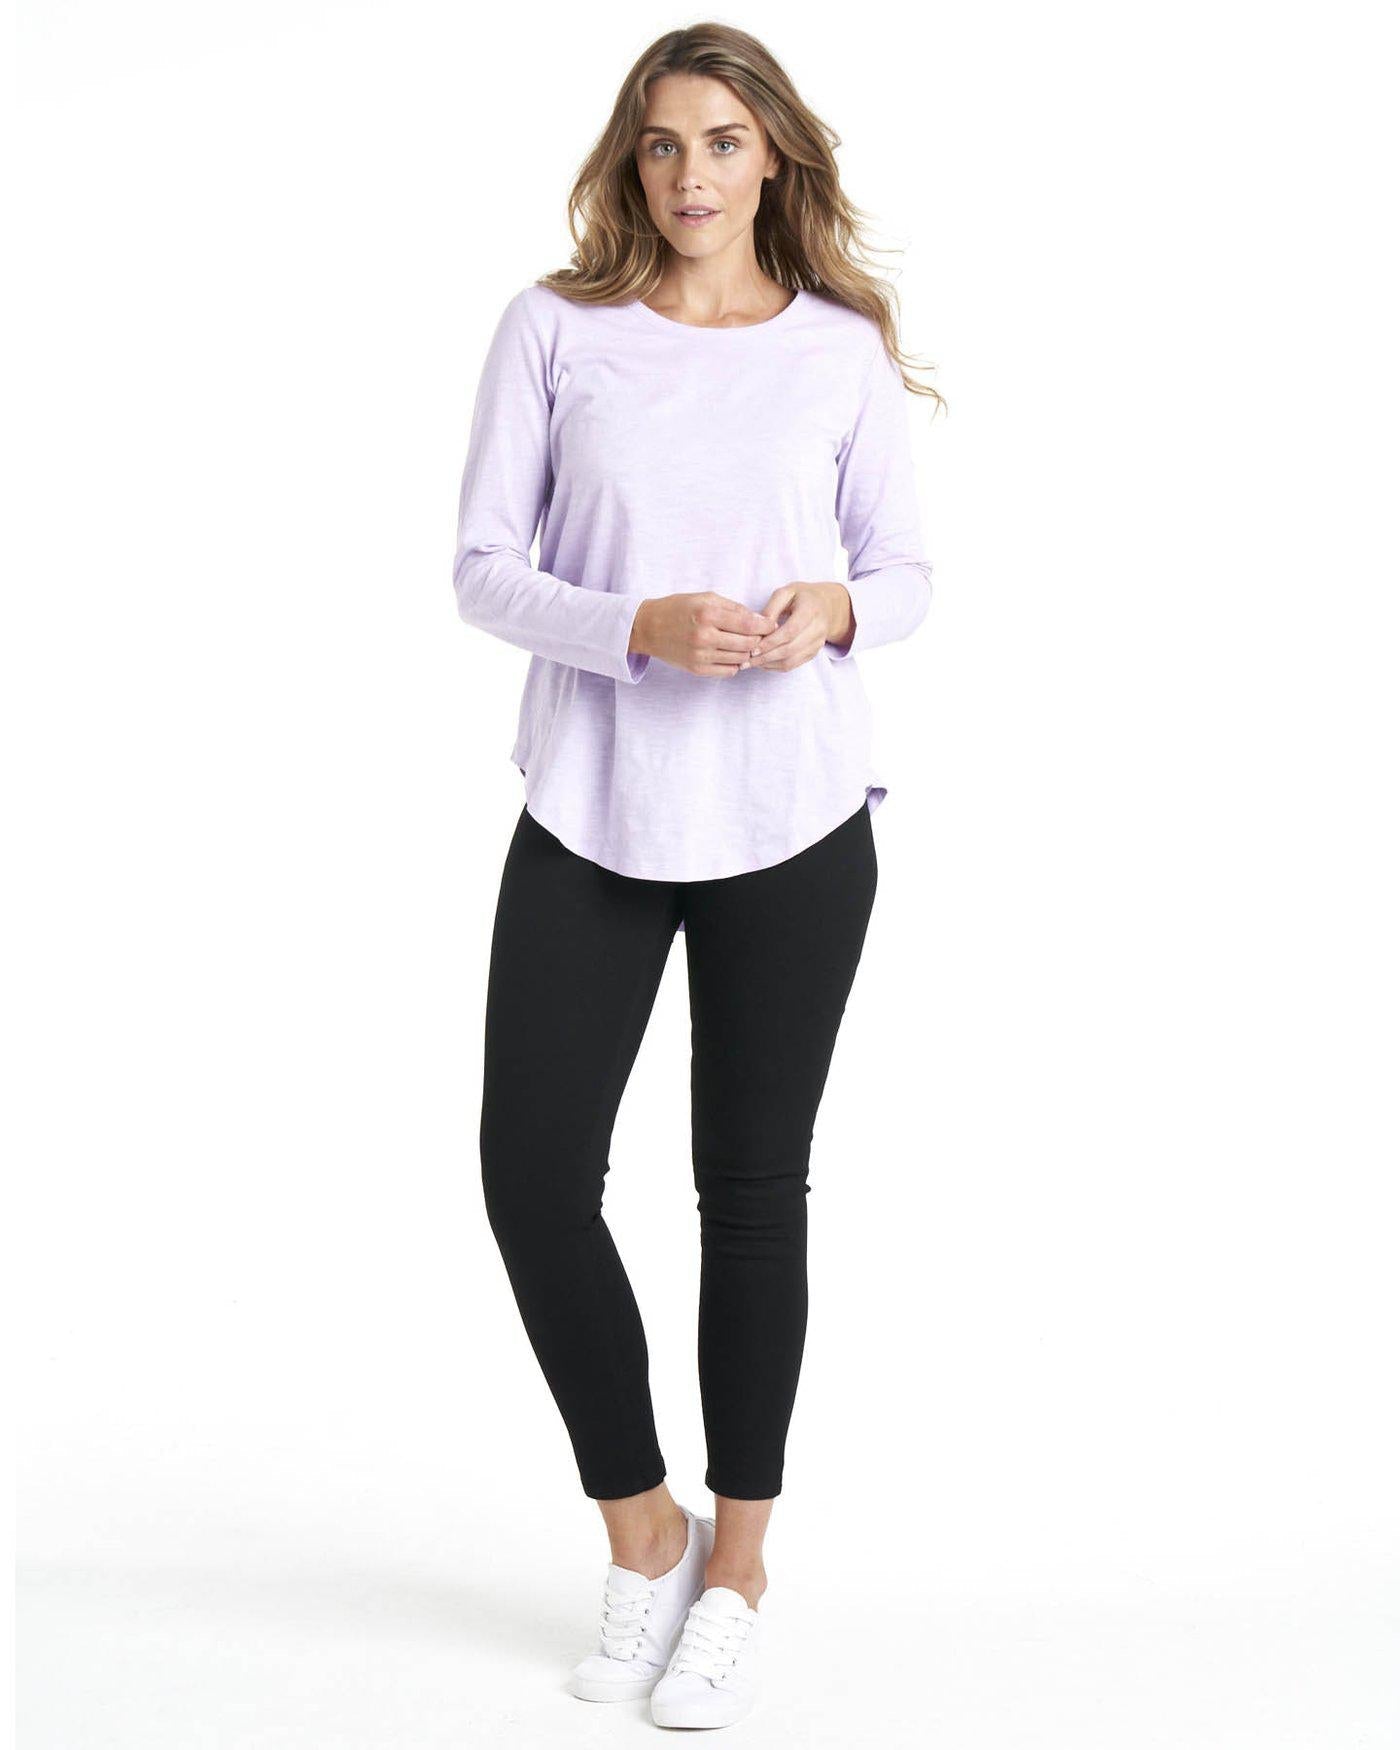 Megan Long Sleeve Top - Periwinkle - Betty Basics - FUDGE Gifts Home Lifestyle